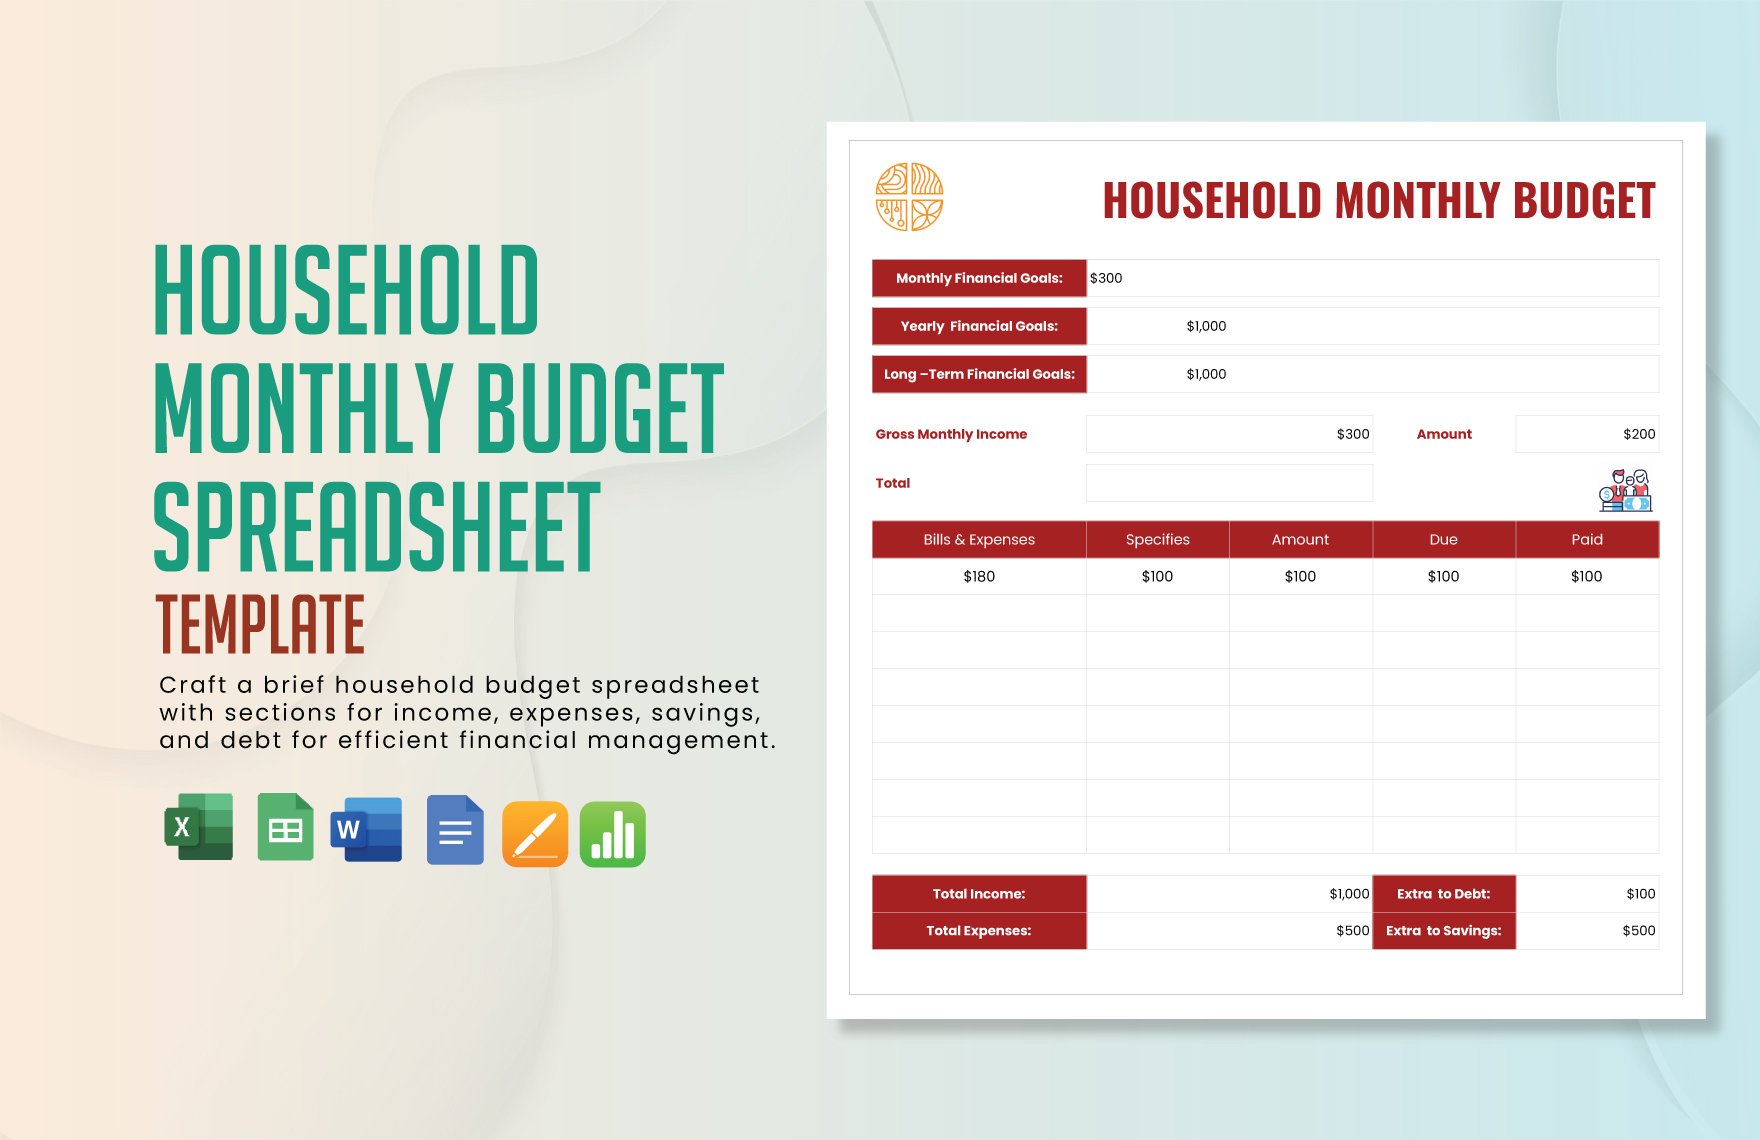 Household Monthly Budget Spreadsheet Template in Word, Google Docs, Excel, Google Sheets, Apple Pages, Apple Numbers